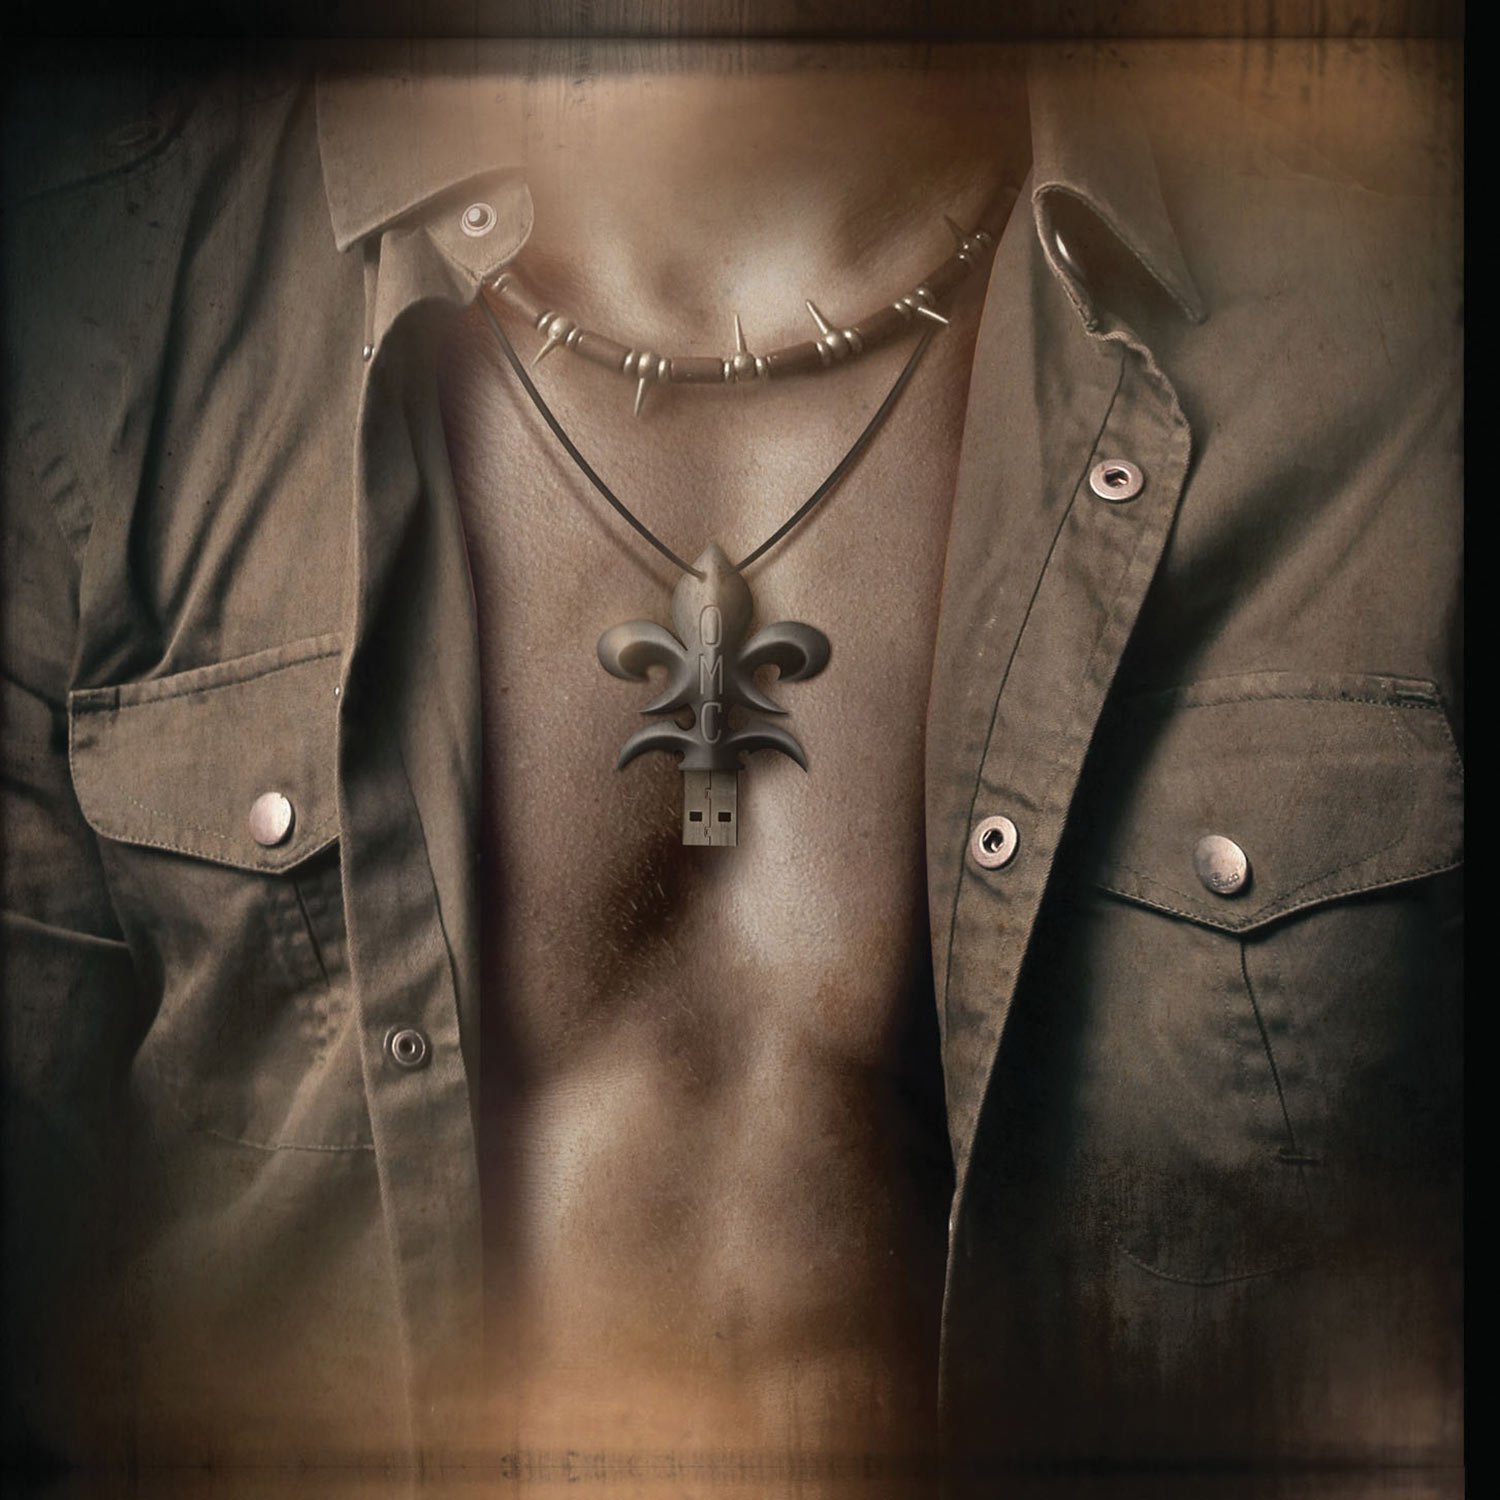 Geoff Tate and Operation: Mindcrime – The Queensryche Vocalist Returns with His Latest Release!